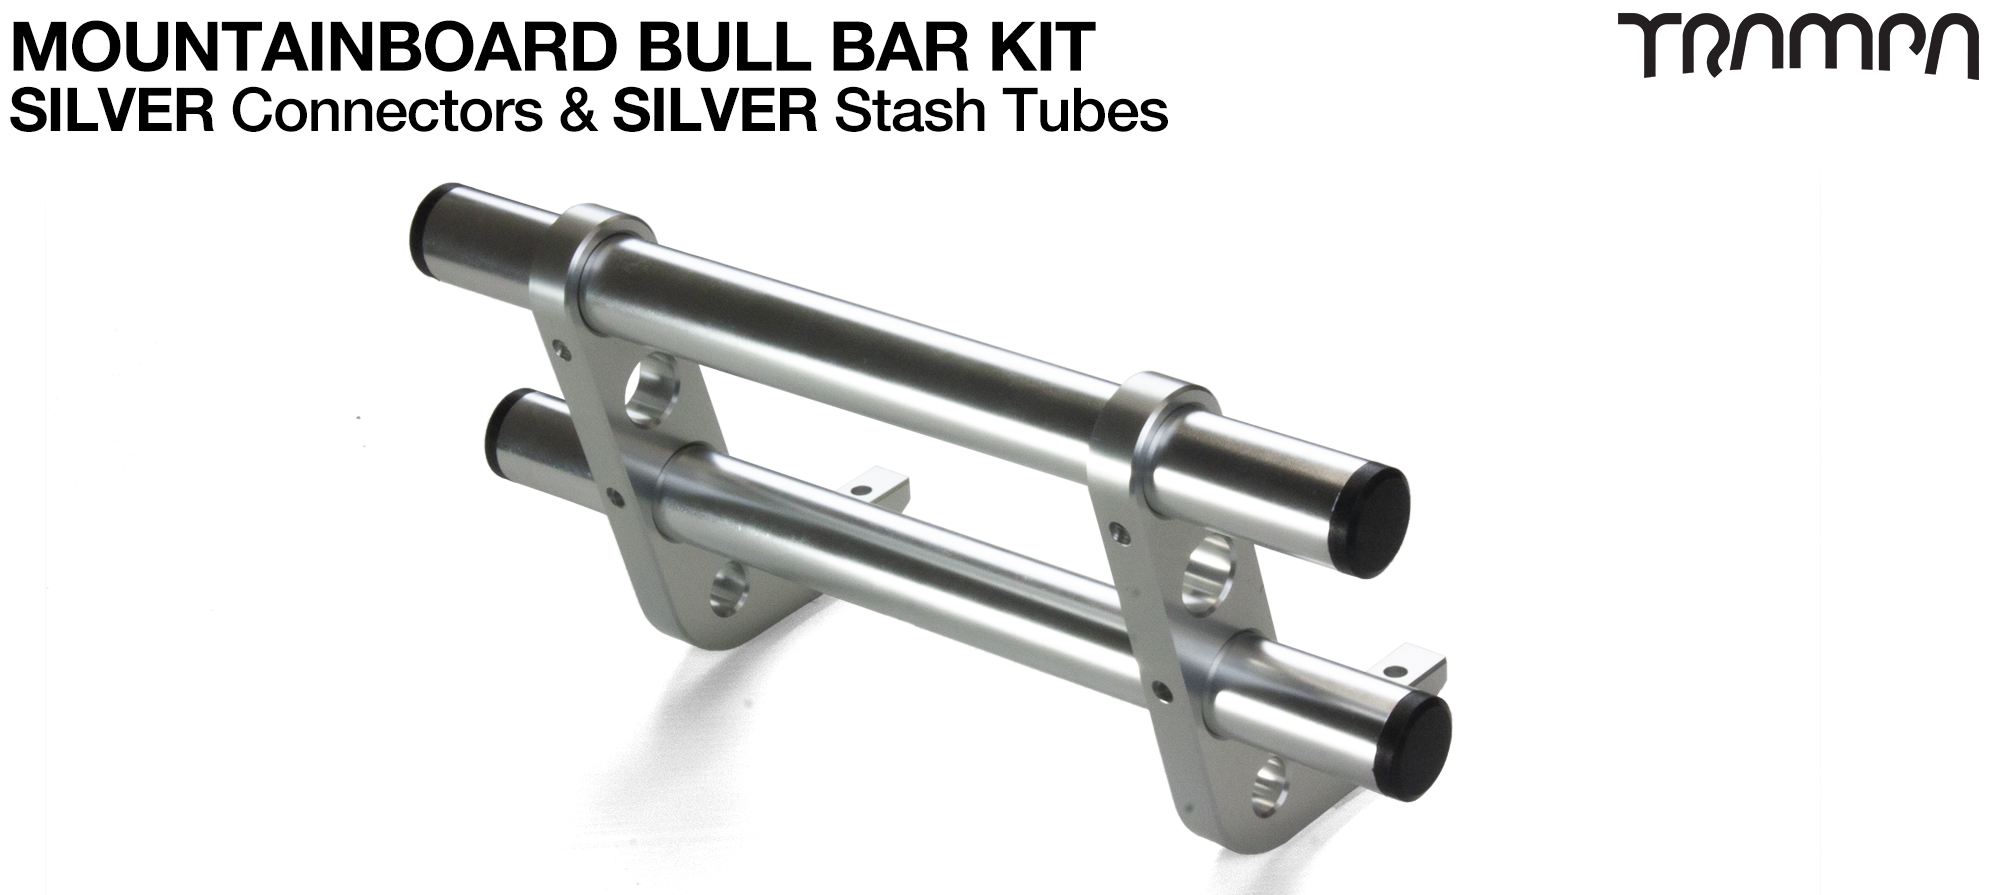 BLACK Uprights & SILVER Crossbar BULL BARS for MOUNTAINBOARDS using T6 Heat Treated CNC'd Aluminum Clamps, Hollow Aluminium Stash Tubes with Rubber end bungs 